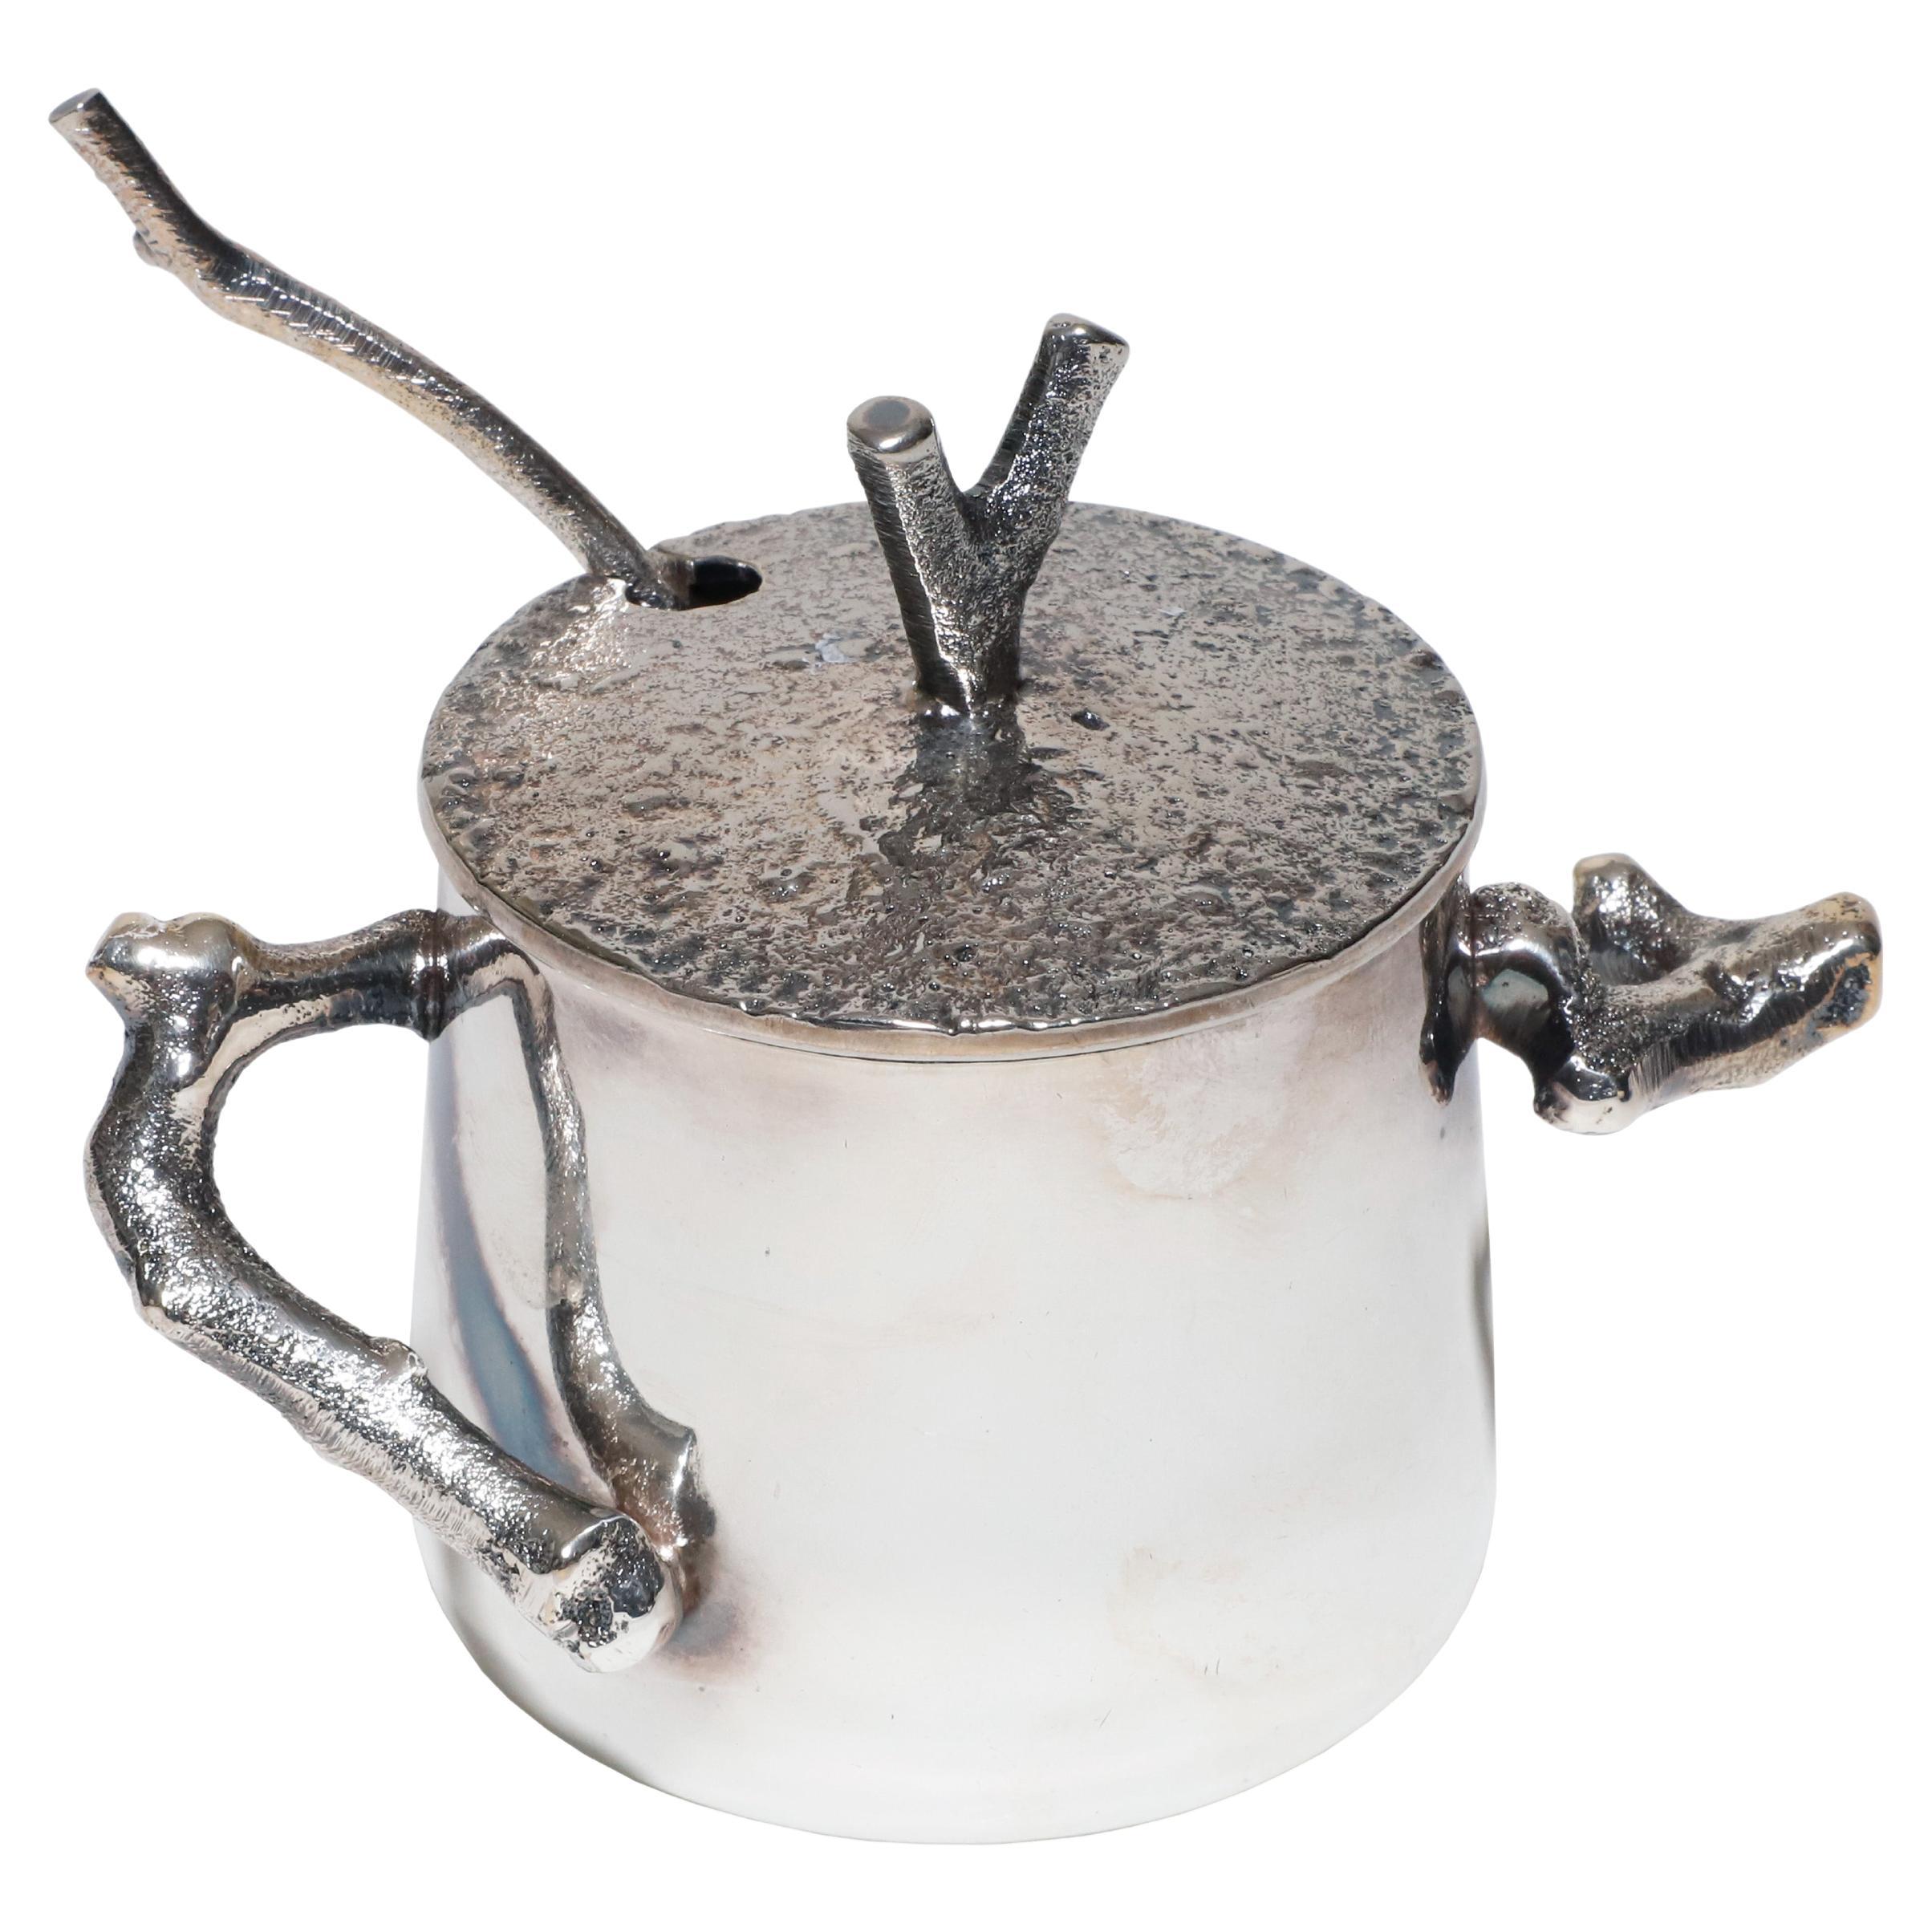 Michael Aram "Bark and Branch Collection" Sugar Bowl with Spoon